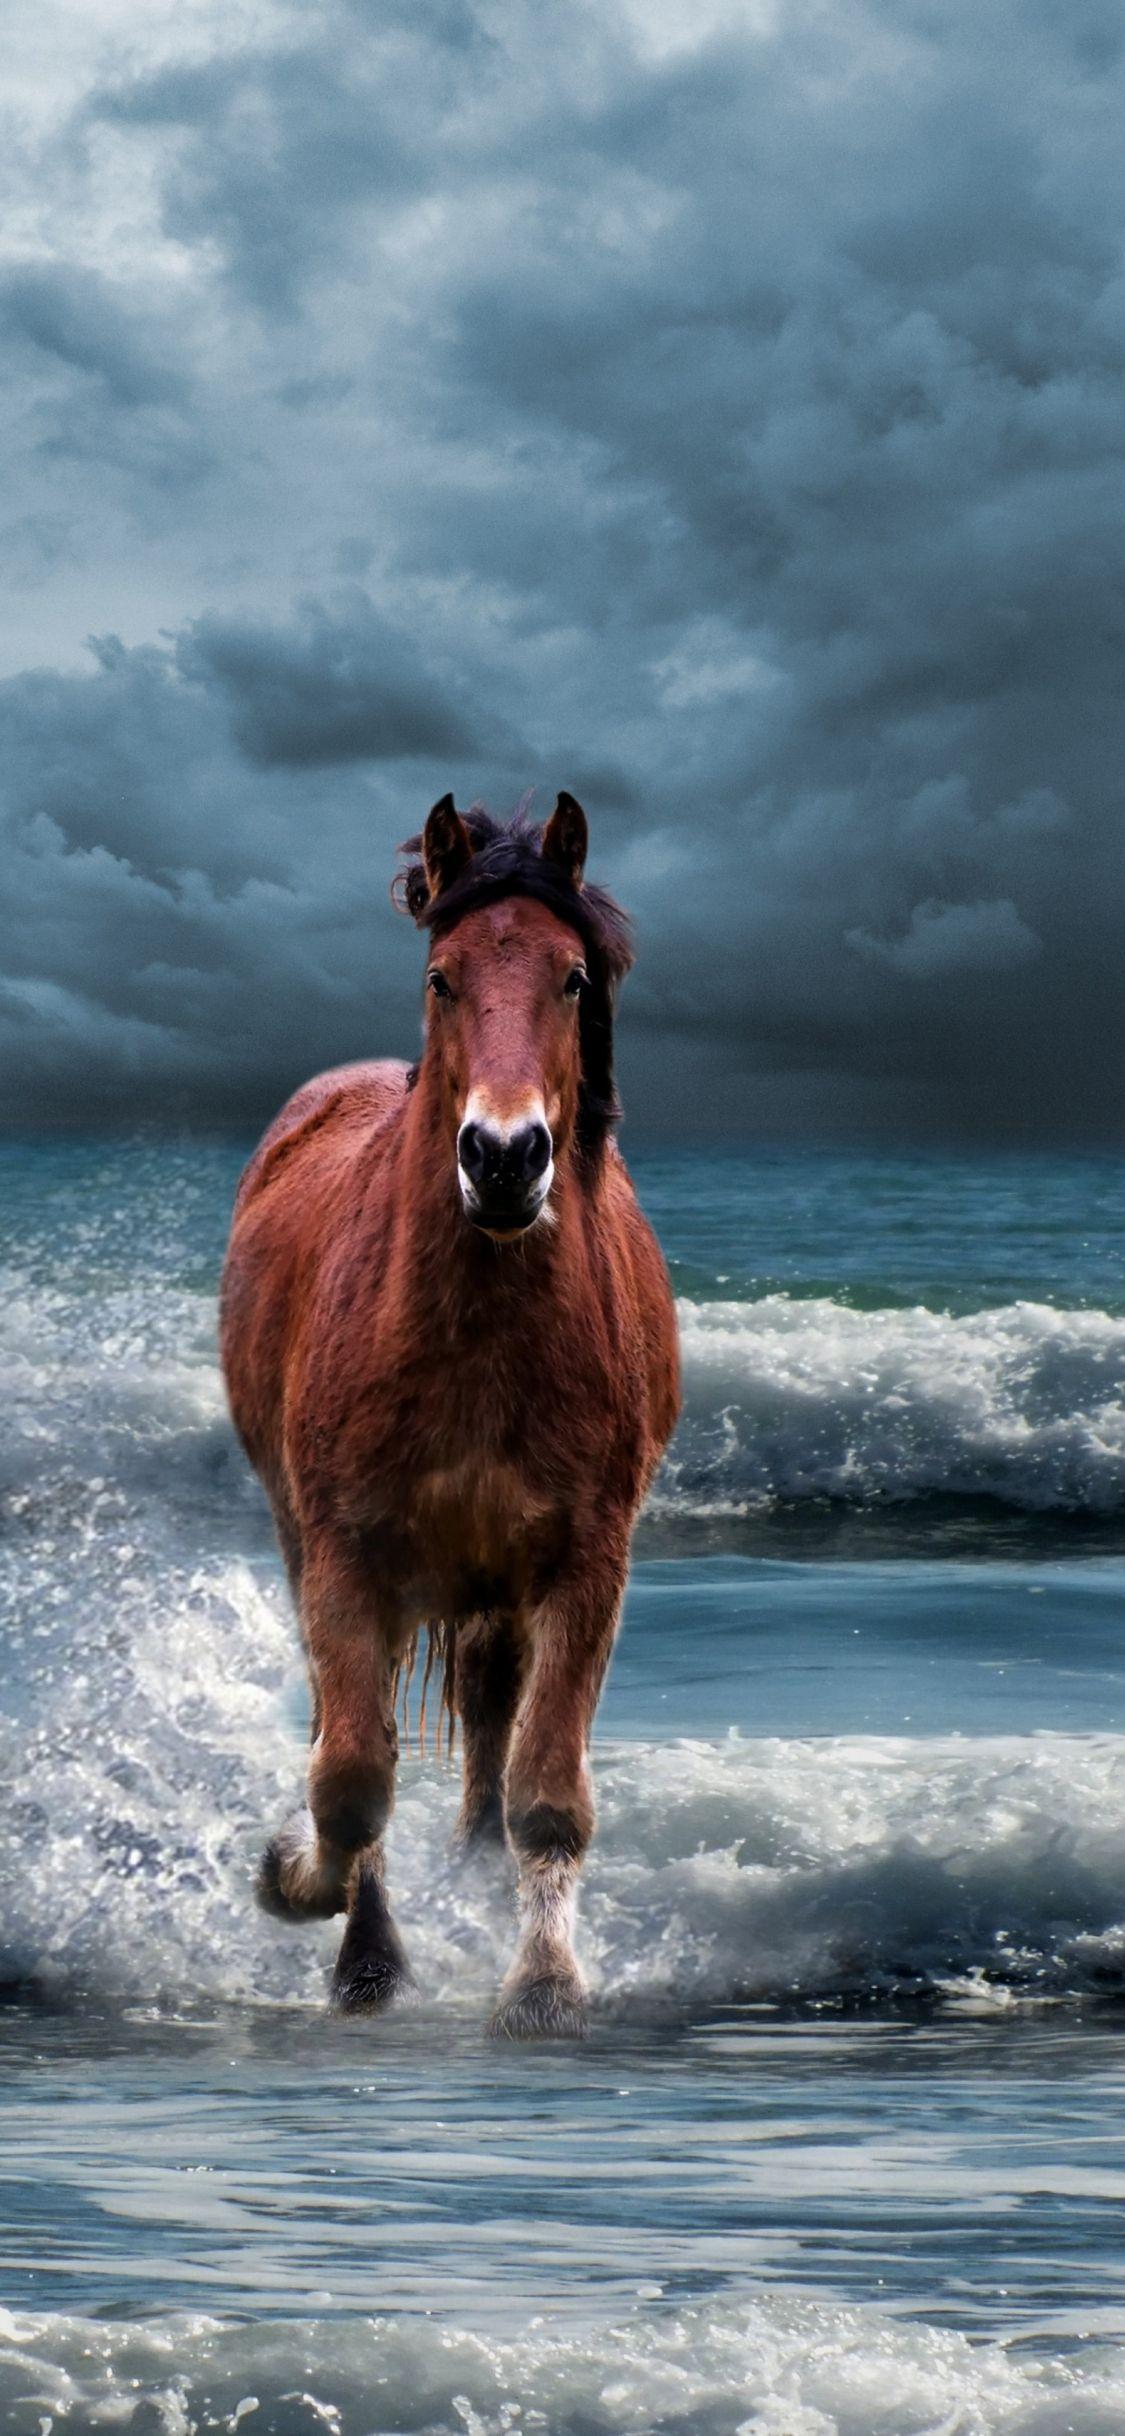 Horse On Beach Wallpapers - Top Free Horse On Beach Backgrounds